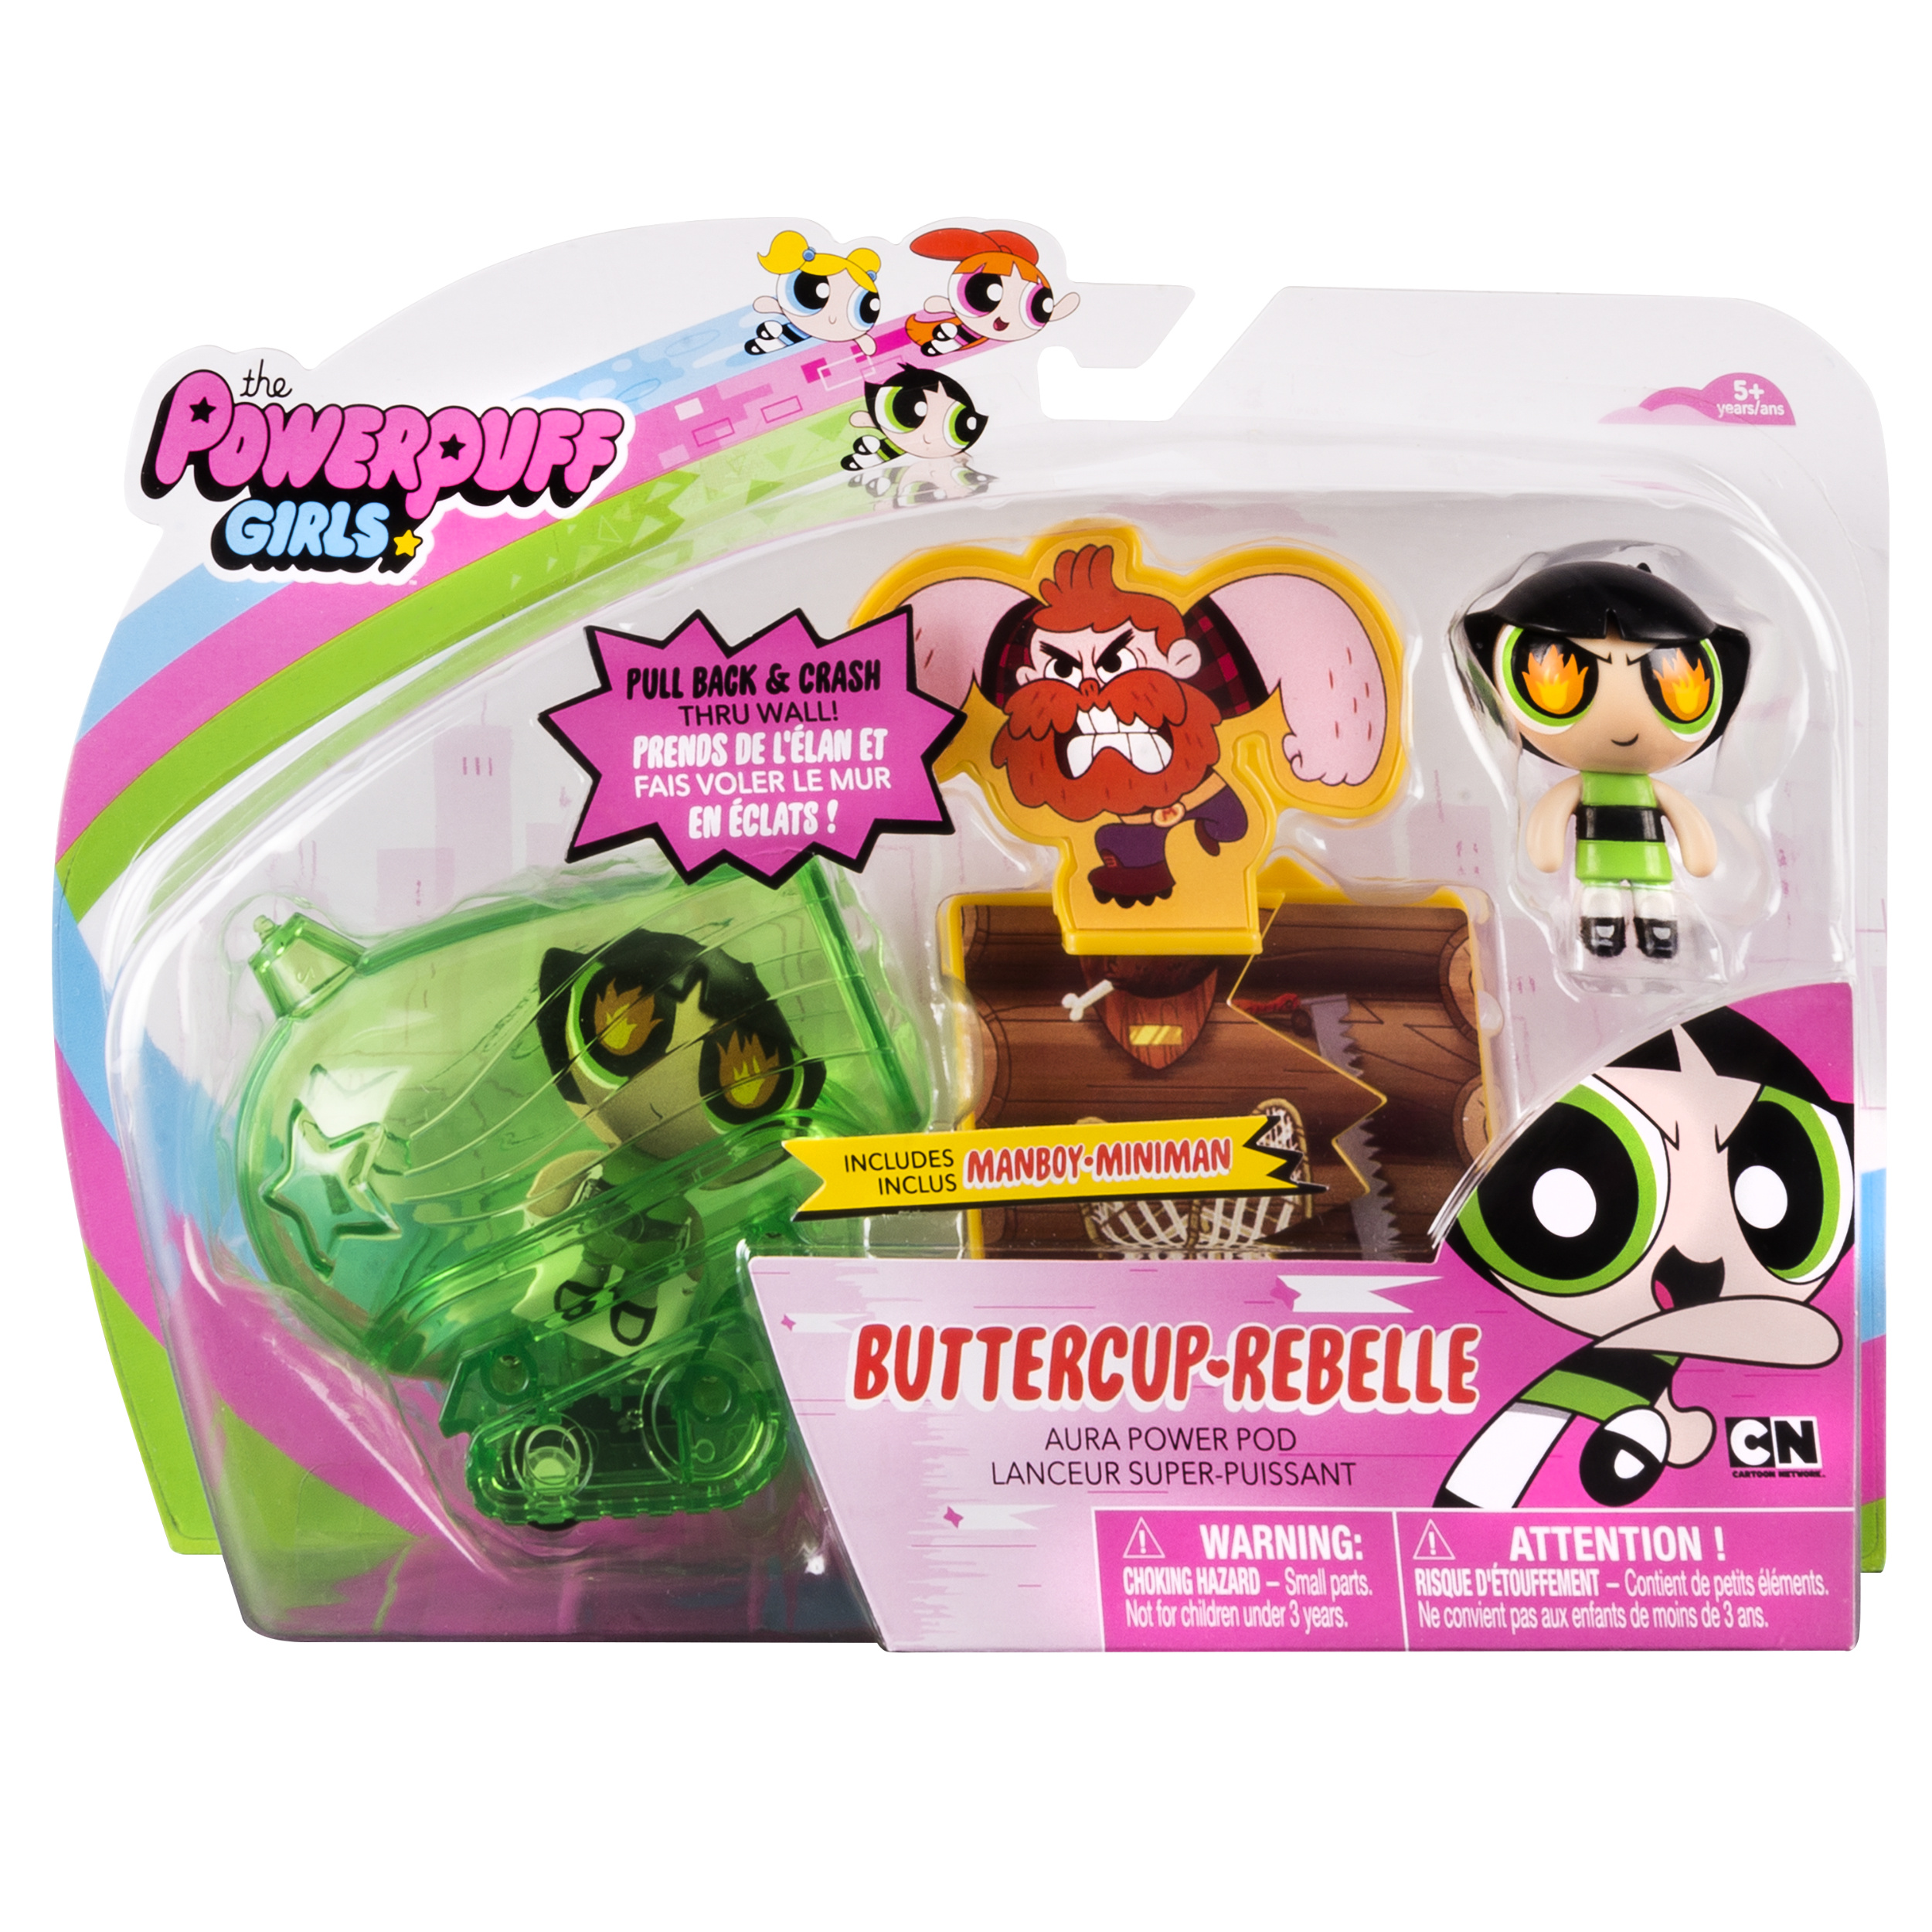 The Powerpuff Girls, Aura Power Pod with 2 inch Buttercup Figure, by Spin Master - image 5 of 5